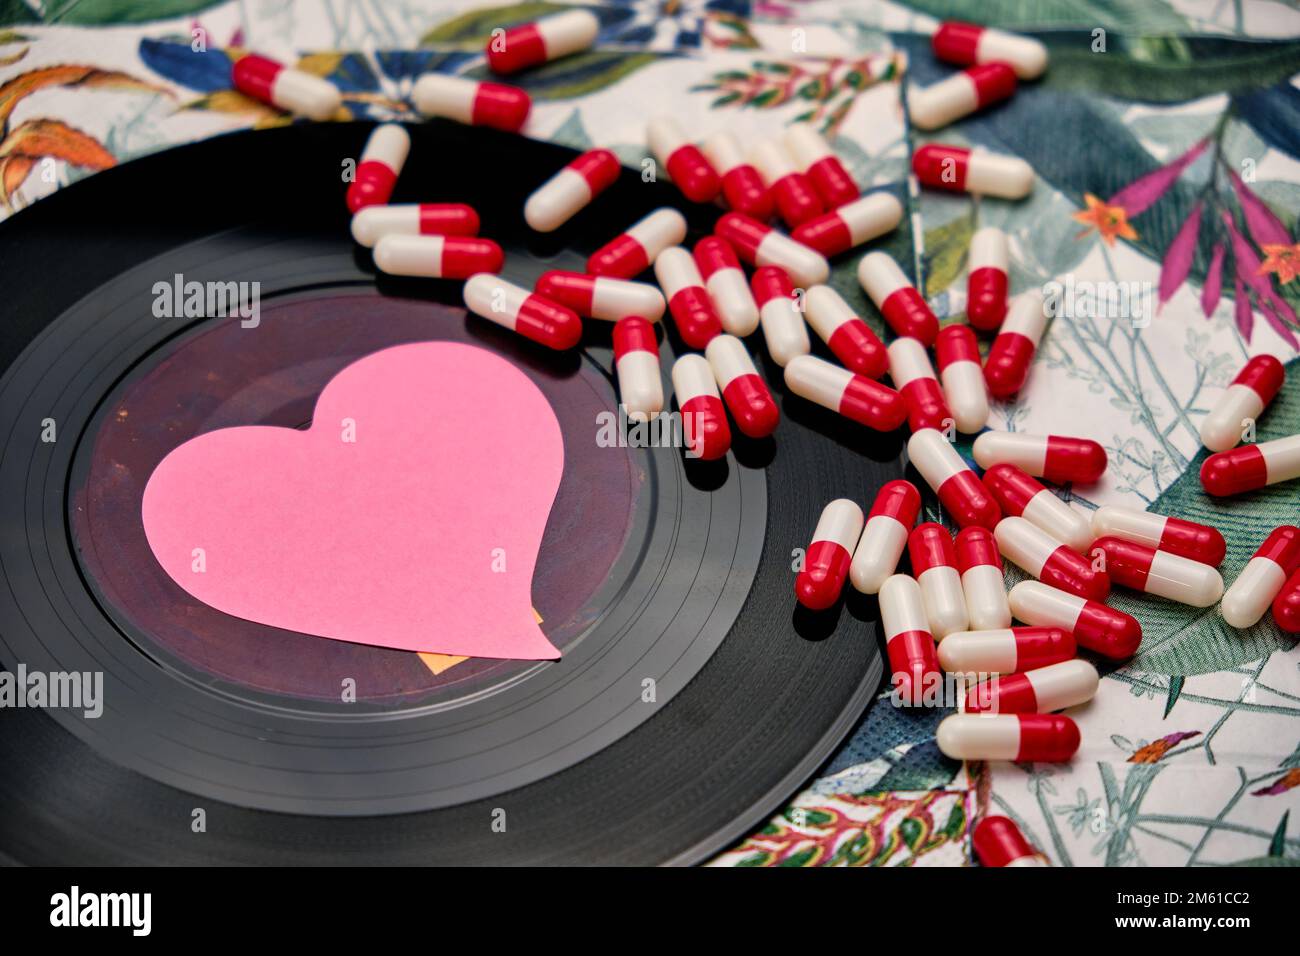 Vinyl record with a pink heart and a bunch of pills, on top of a table with a tropical pattern. Stock Photo